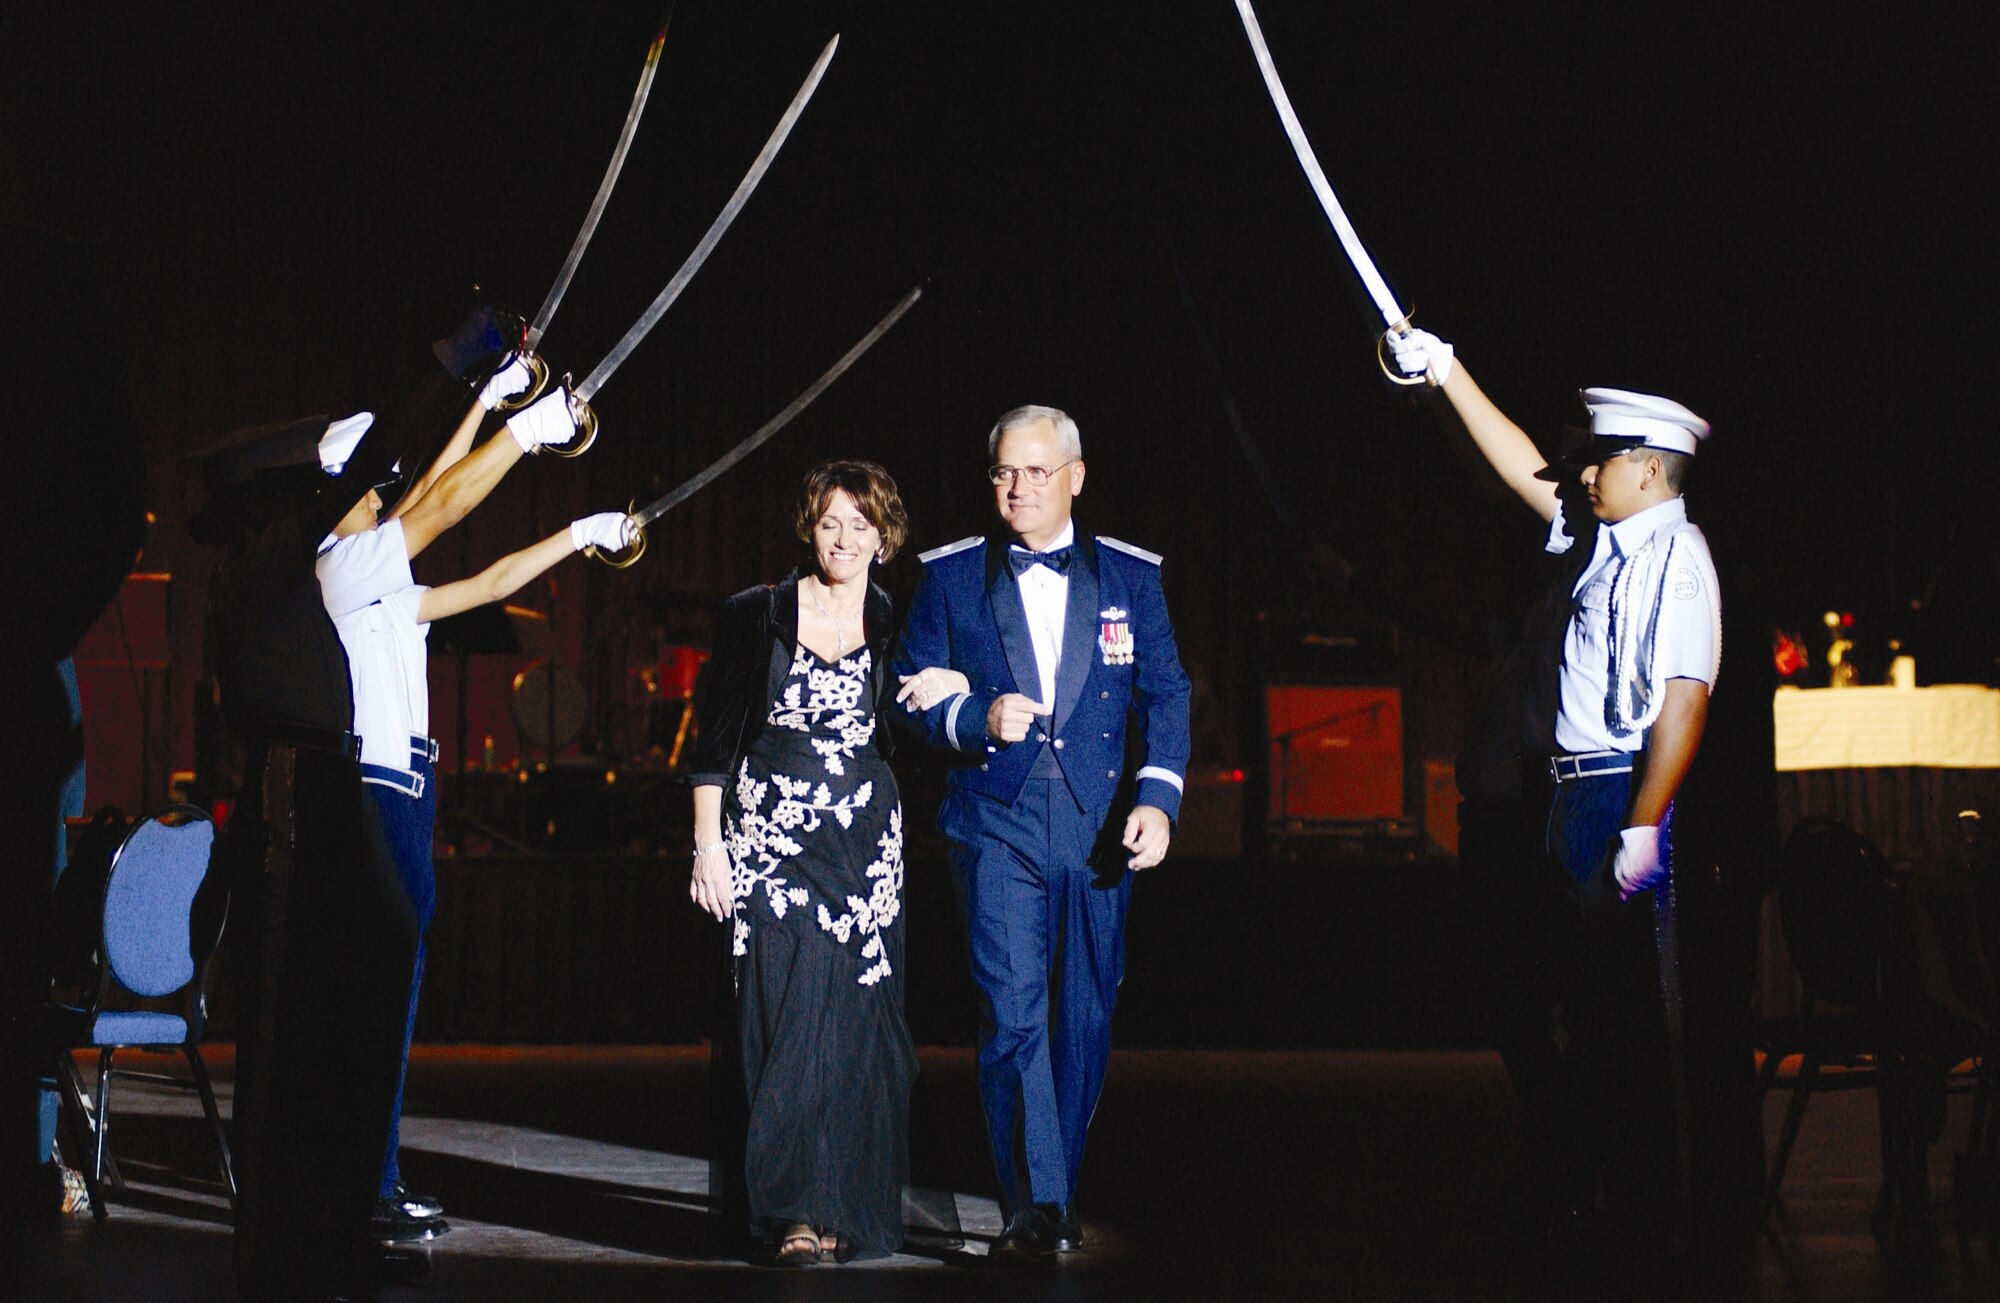 The 452nd Air Mobility Wing Commander and host of the ball, Brig. Gen. James Melin, escorts his wife Linda.(U.S. Air Force photos by Master Sgt. Keith Baxter/ 4th CTCS)